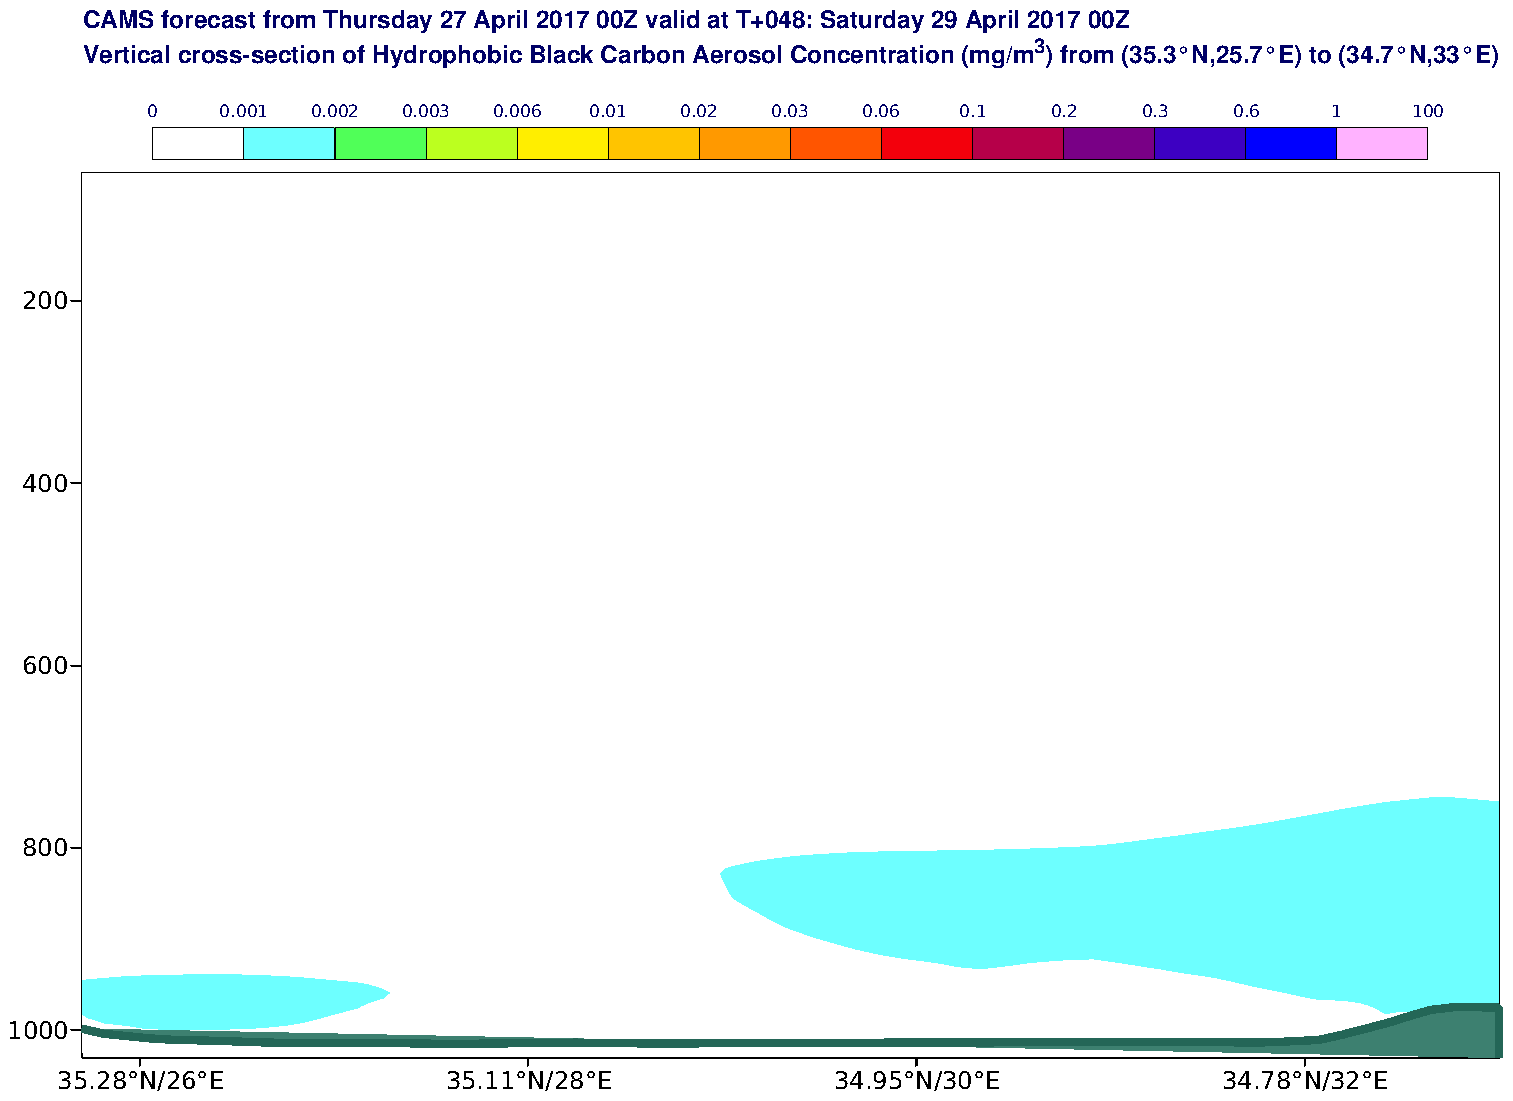 Vertical cross-section of Hydrophobic Black Carbon Aerosol Concentration (mg/m3) valid at T48 - 2017-04-29 00:00